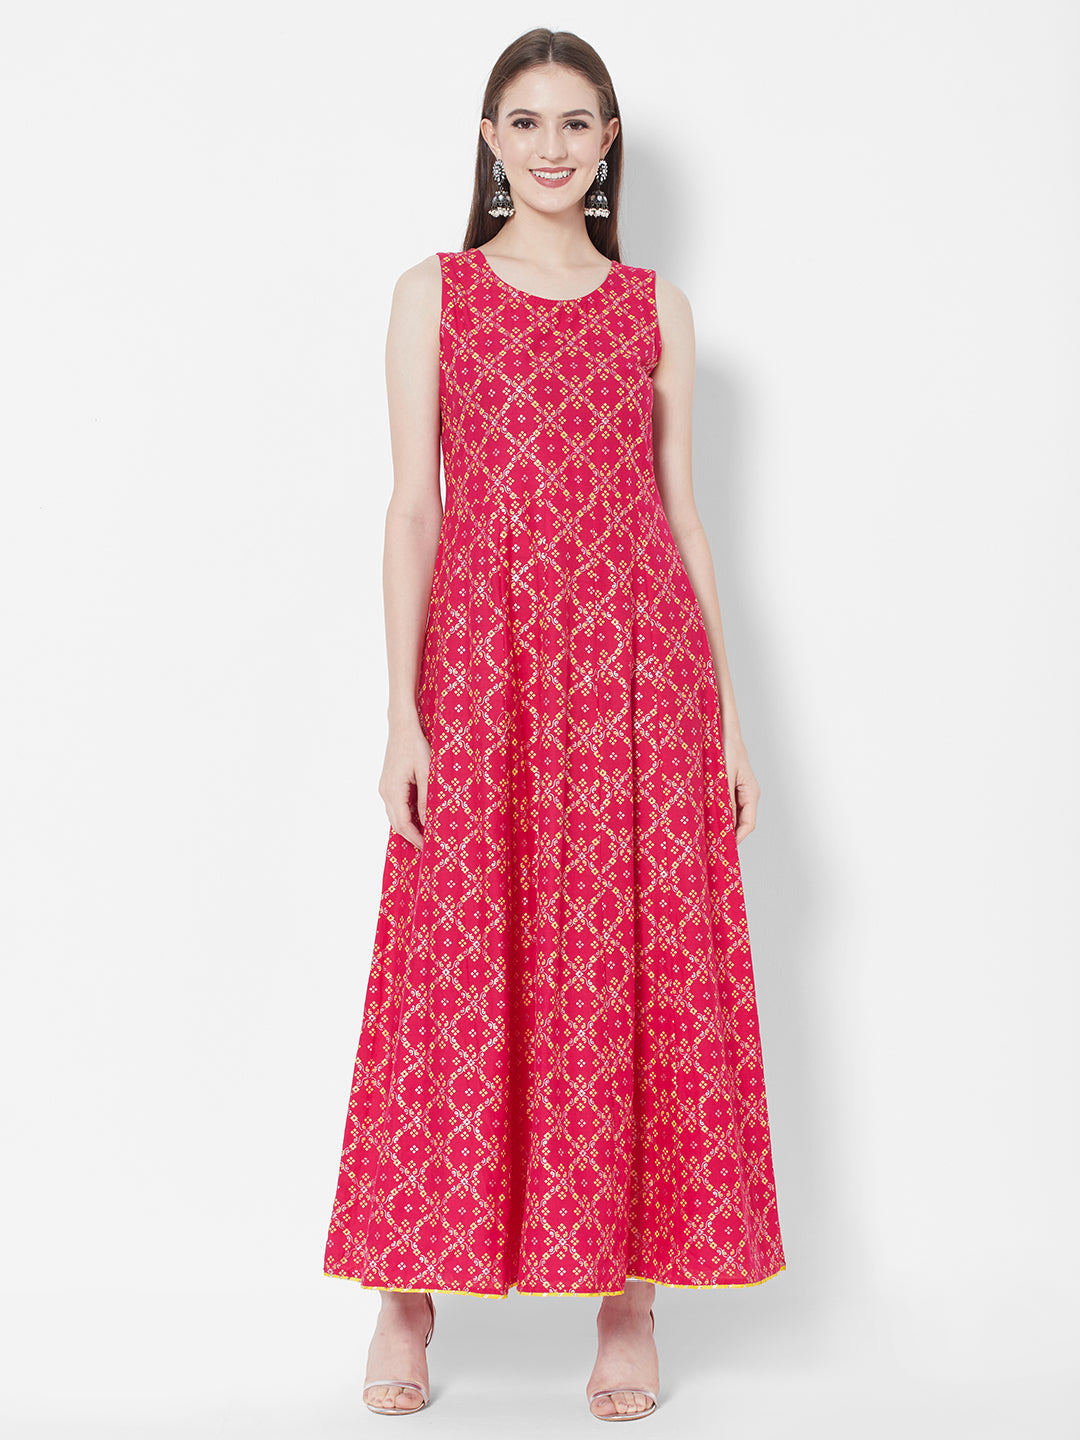 Vedic Ethnic Motifs Printed Cotton Layered Maxi Dress With Sequinned Details